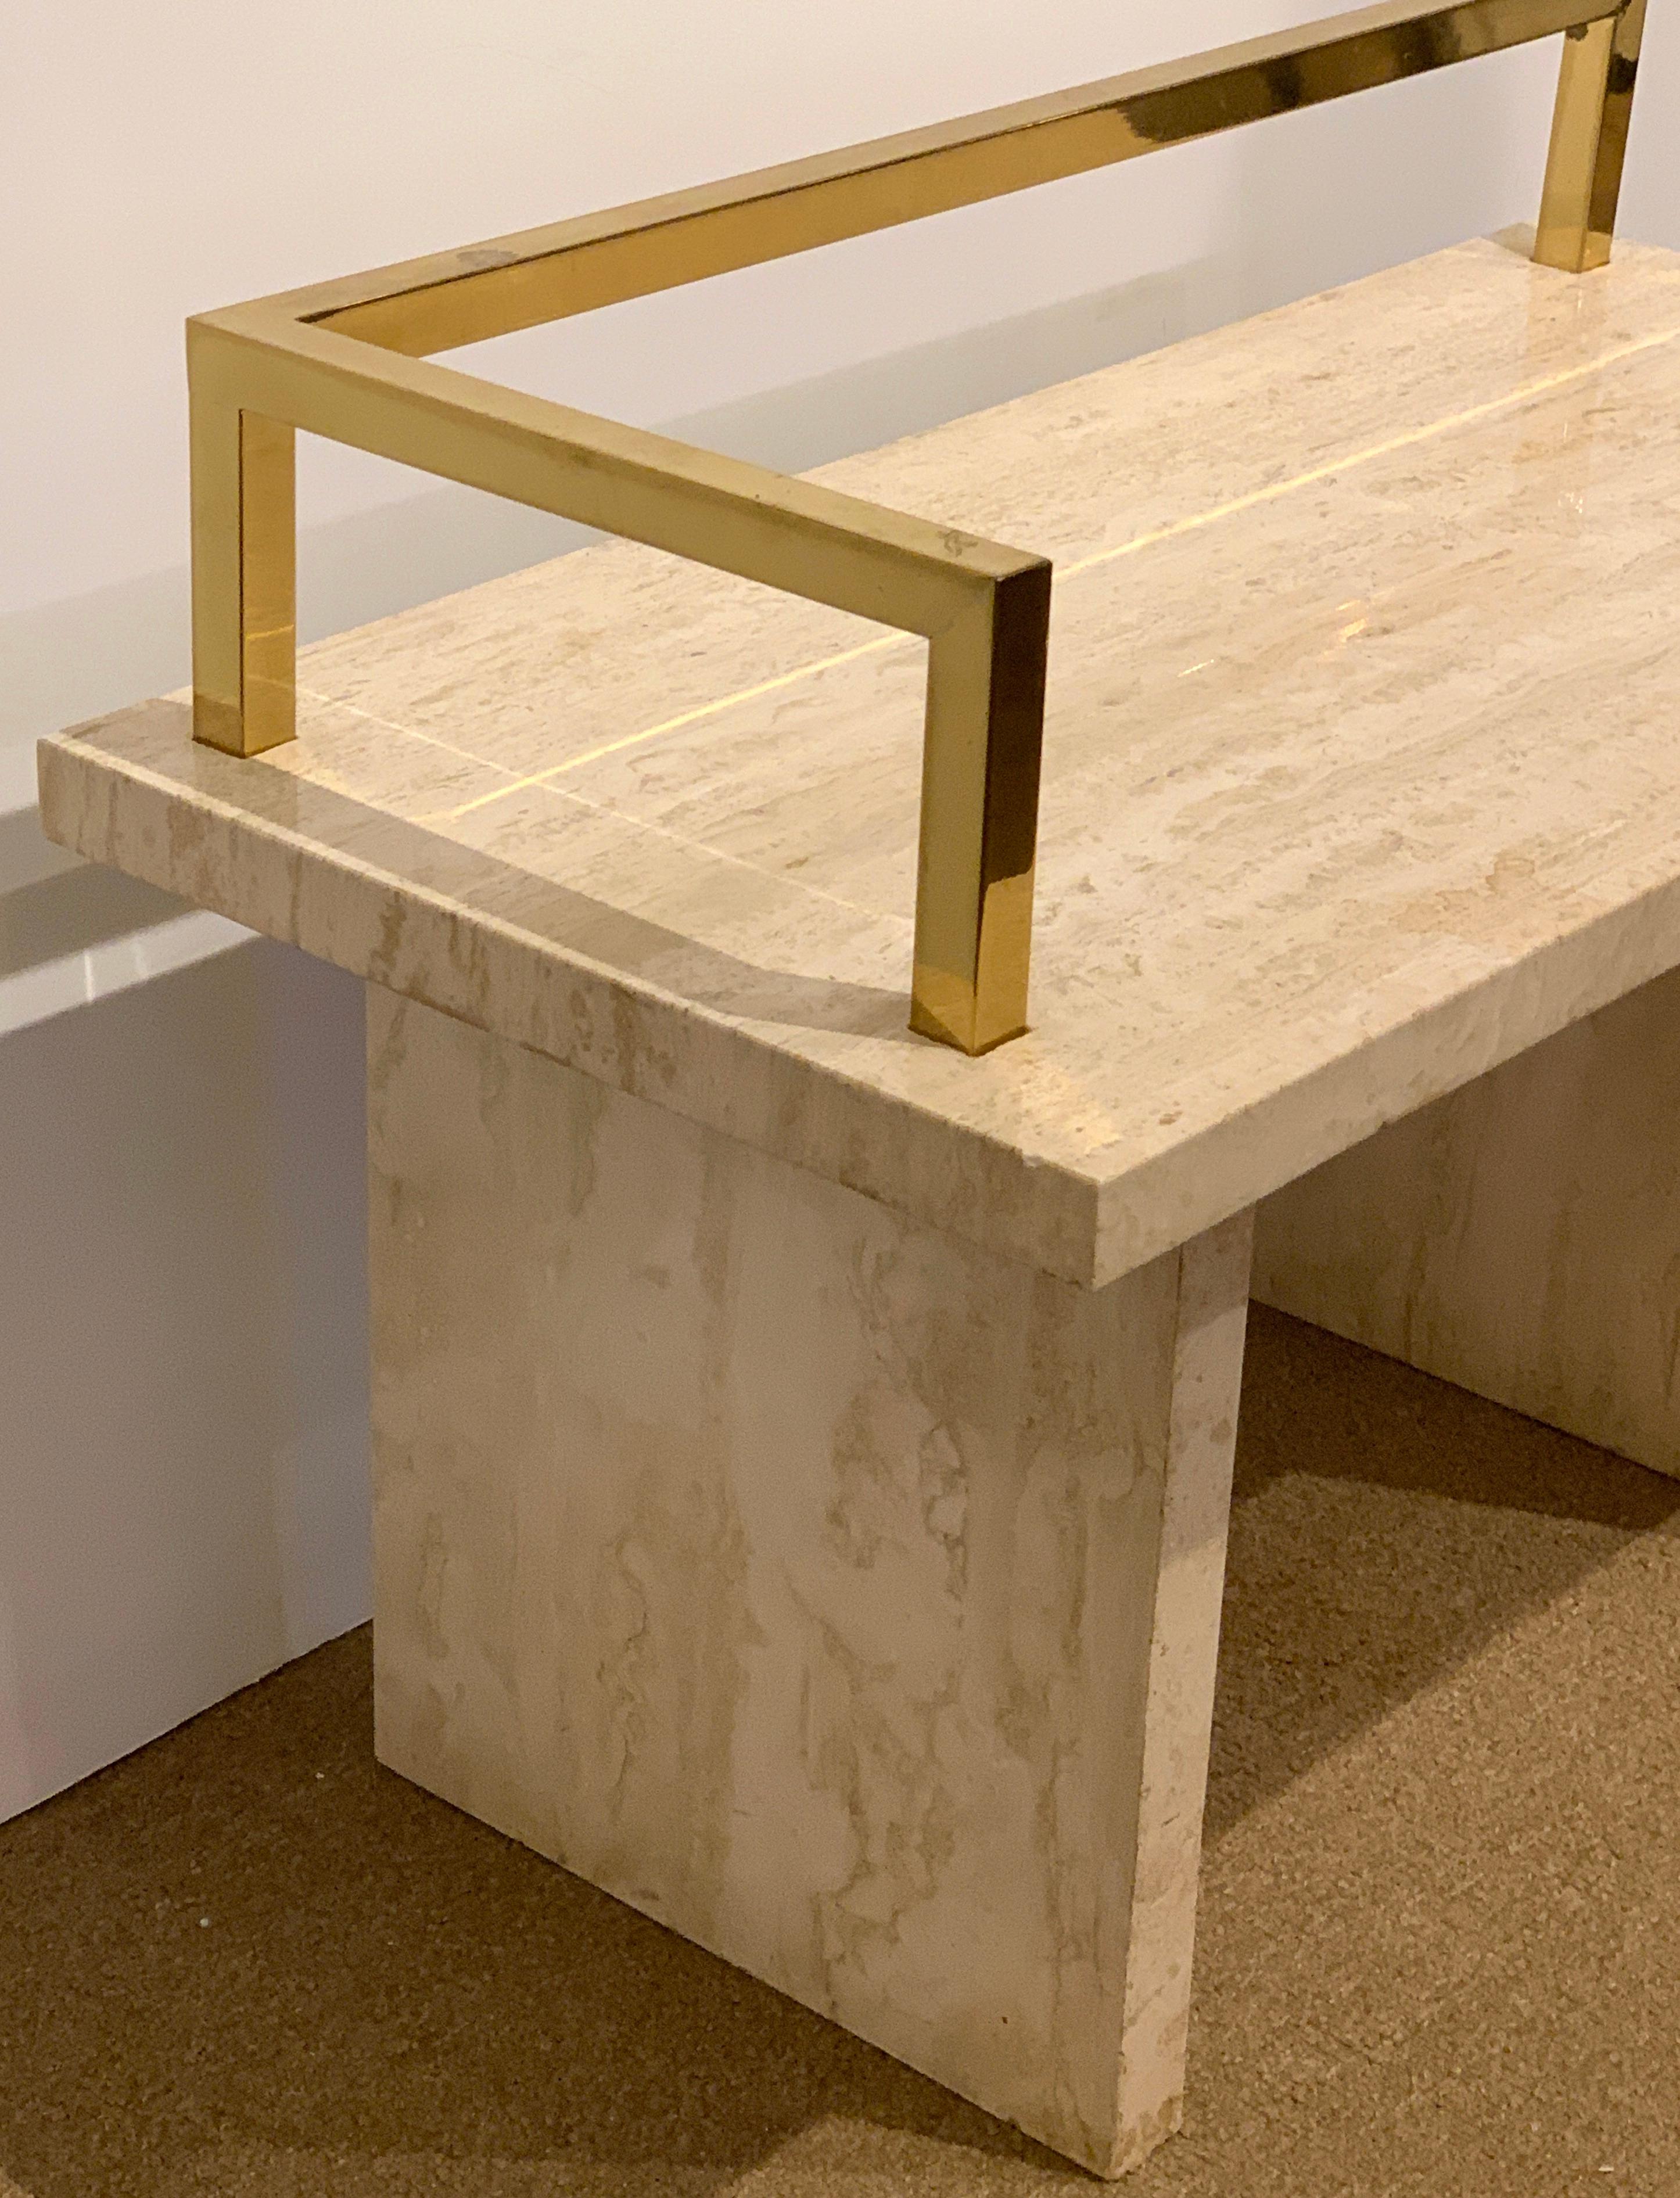 Stunning 1970s brass and travertine monolithic bench, simplistic, and sublime, perfect anywhere indoors and out, even bathroom/shower application. Height of the bench to the top of brass gallery is 26